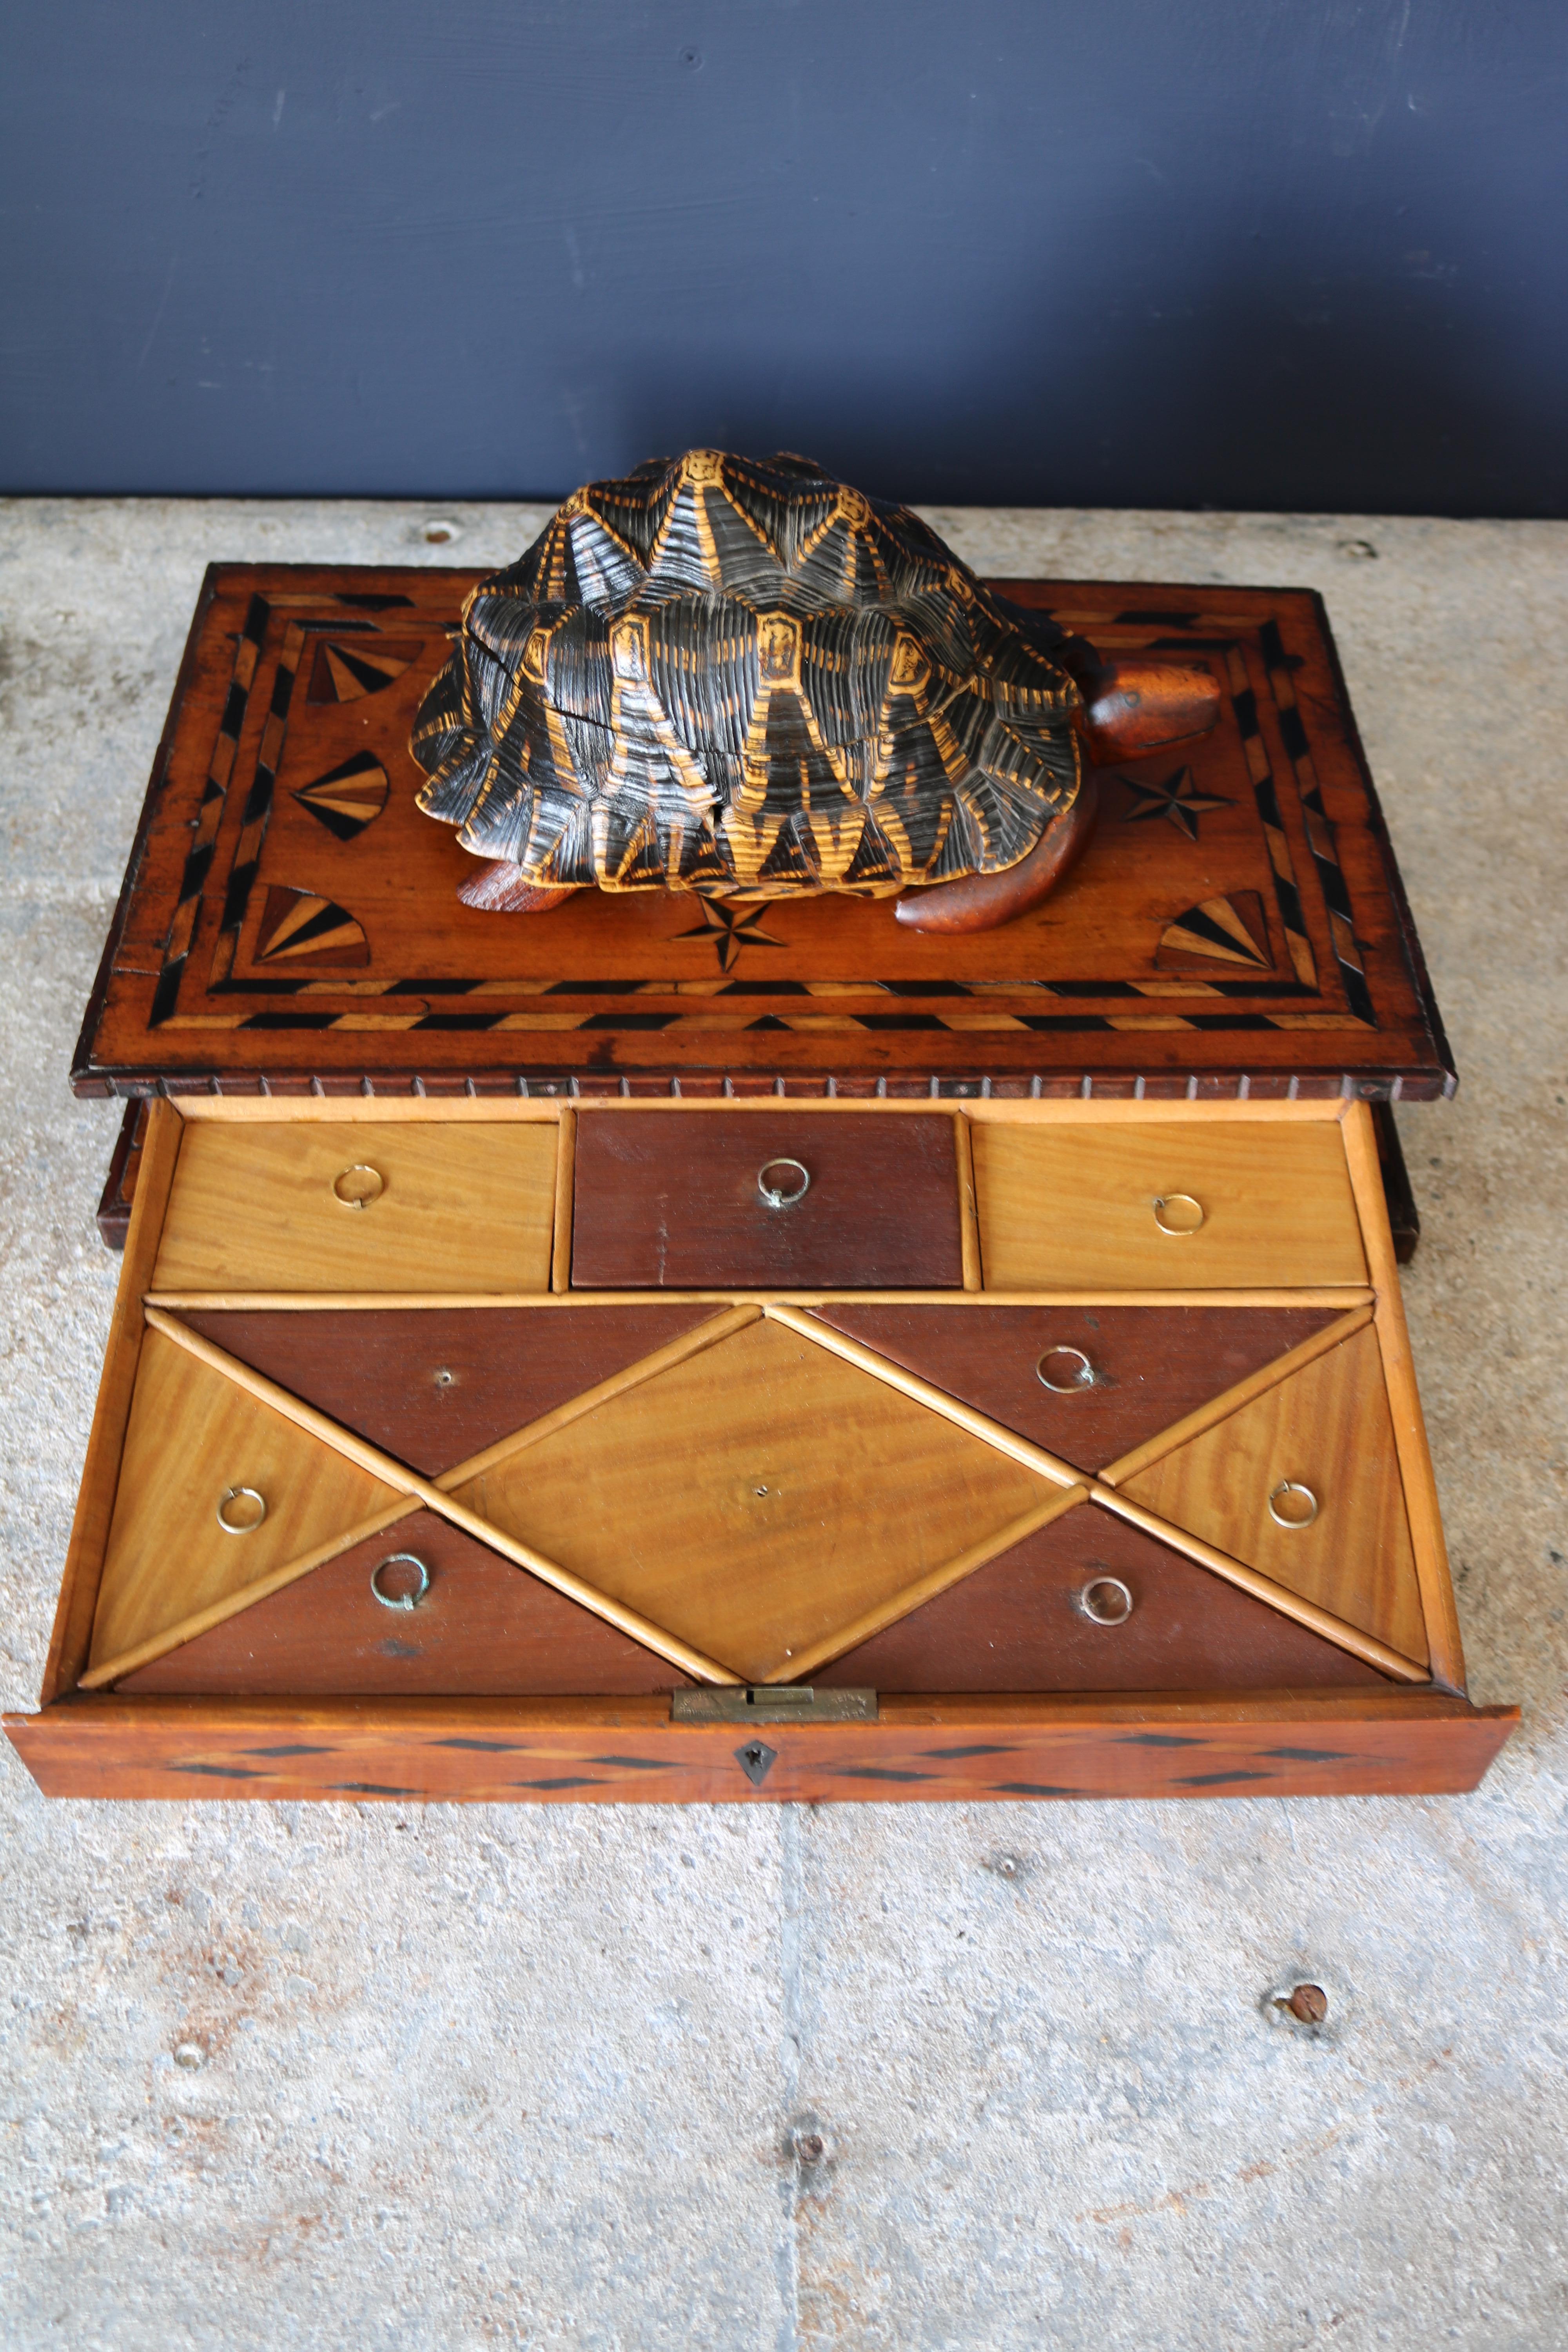 A rare mid-19th century (circa 1840) Ceylonese inlaid box with hinged tortoise lid and marquetry worked box with draw.